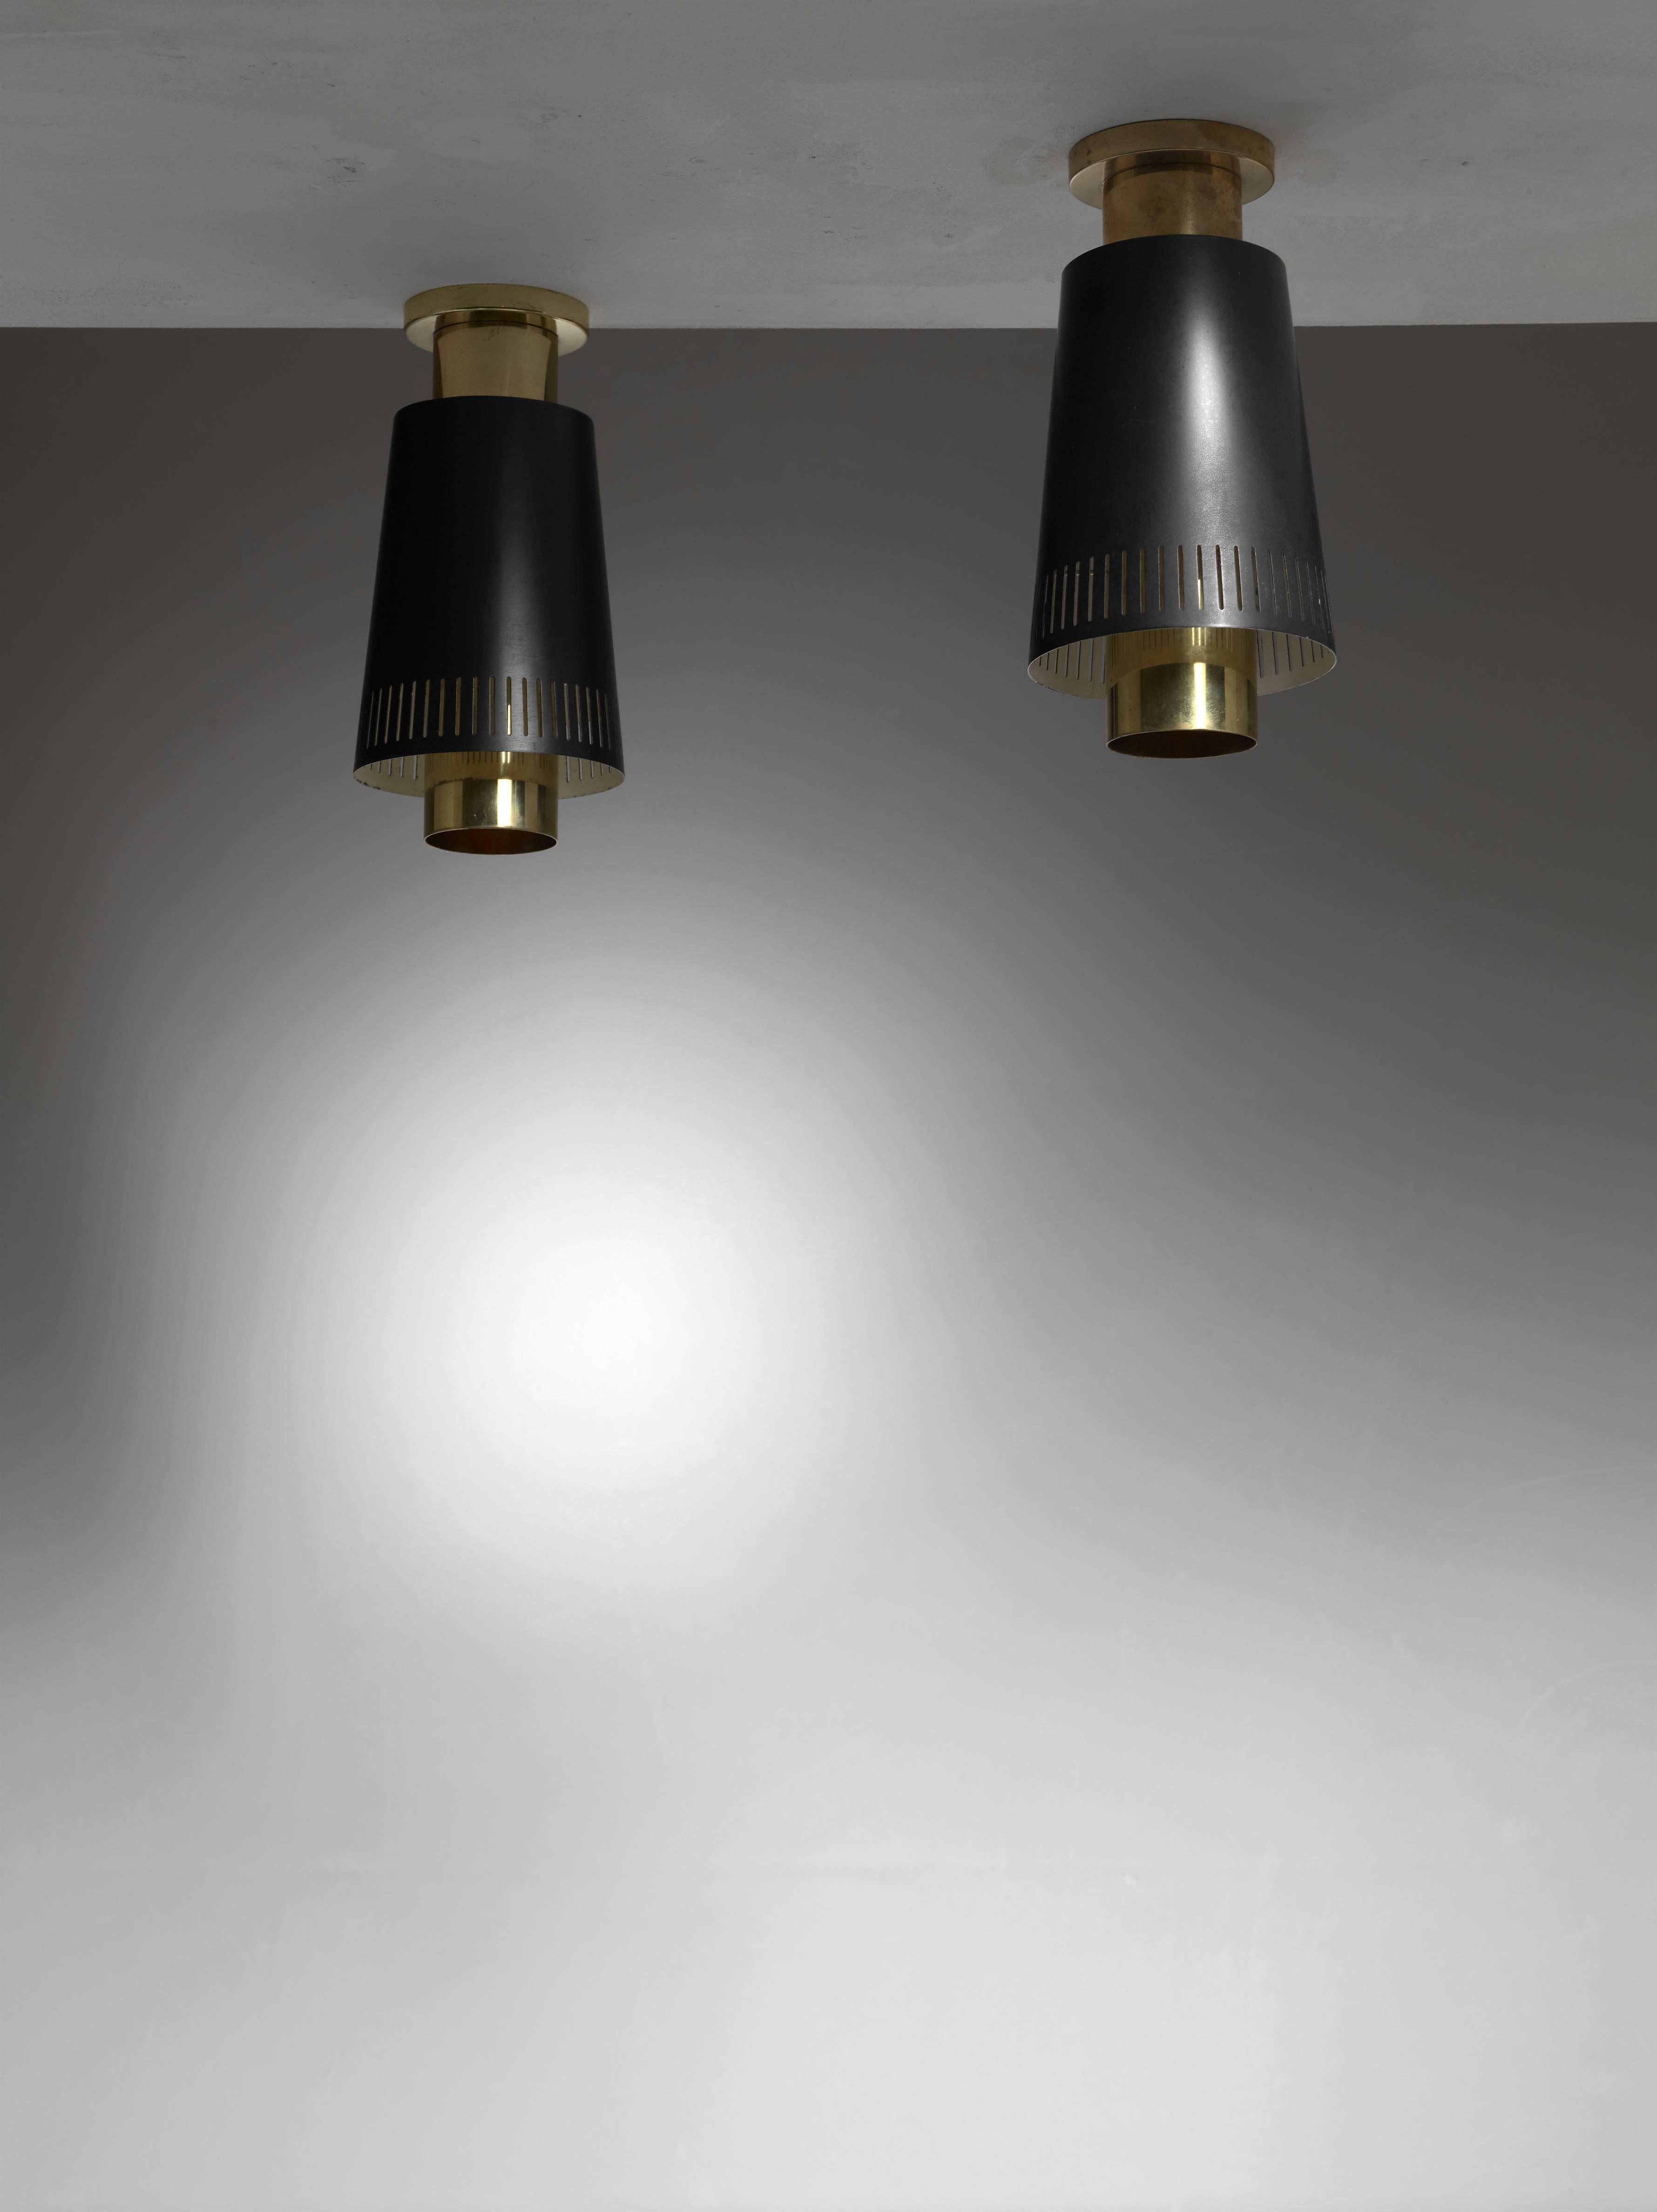 Scandinavian Modern Pair of Paavo Tynell Black and Brass Ceiling Lamps for Taito, Finland, 1950s For Sale